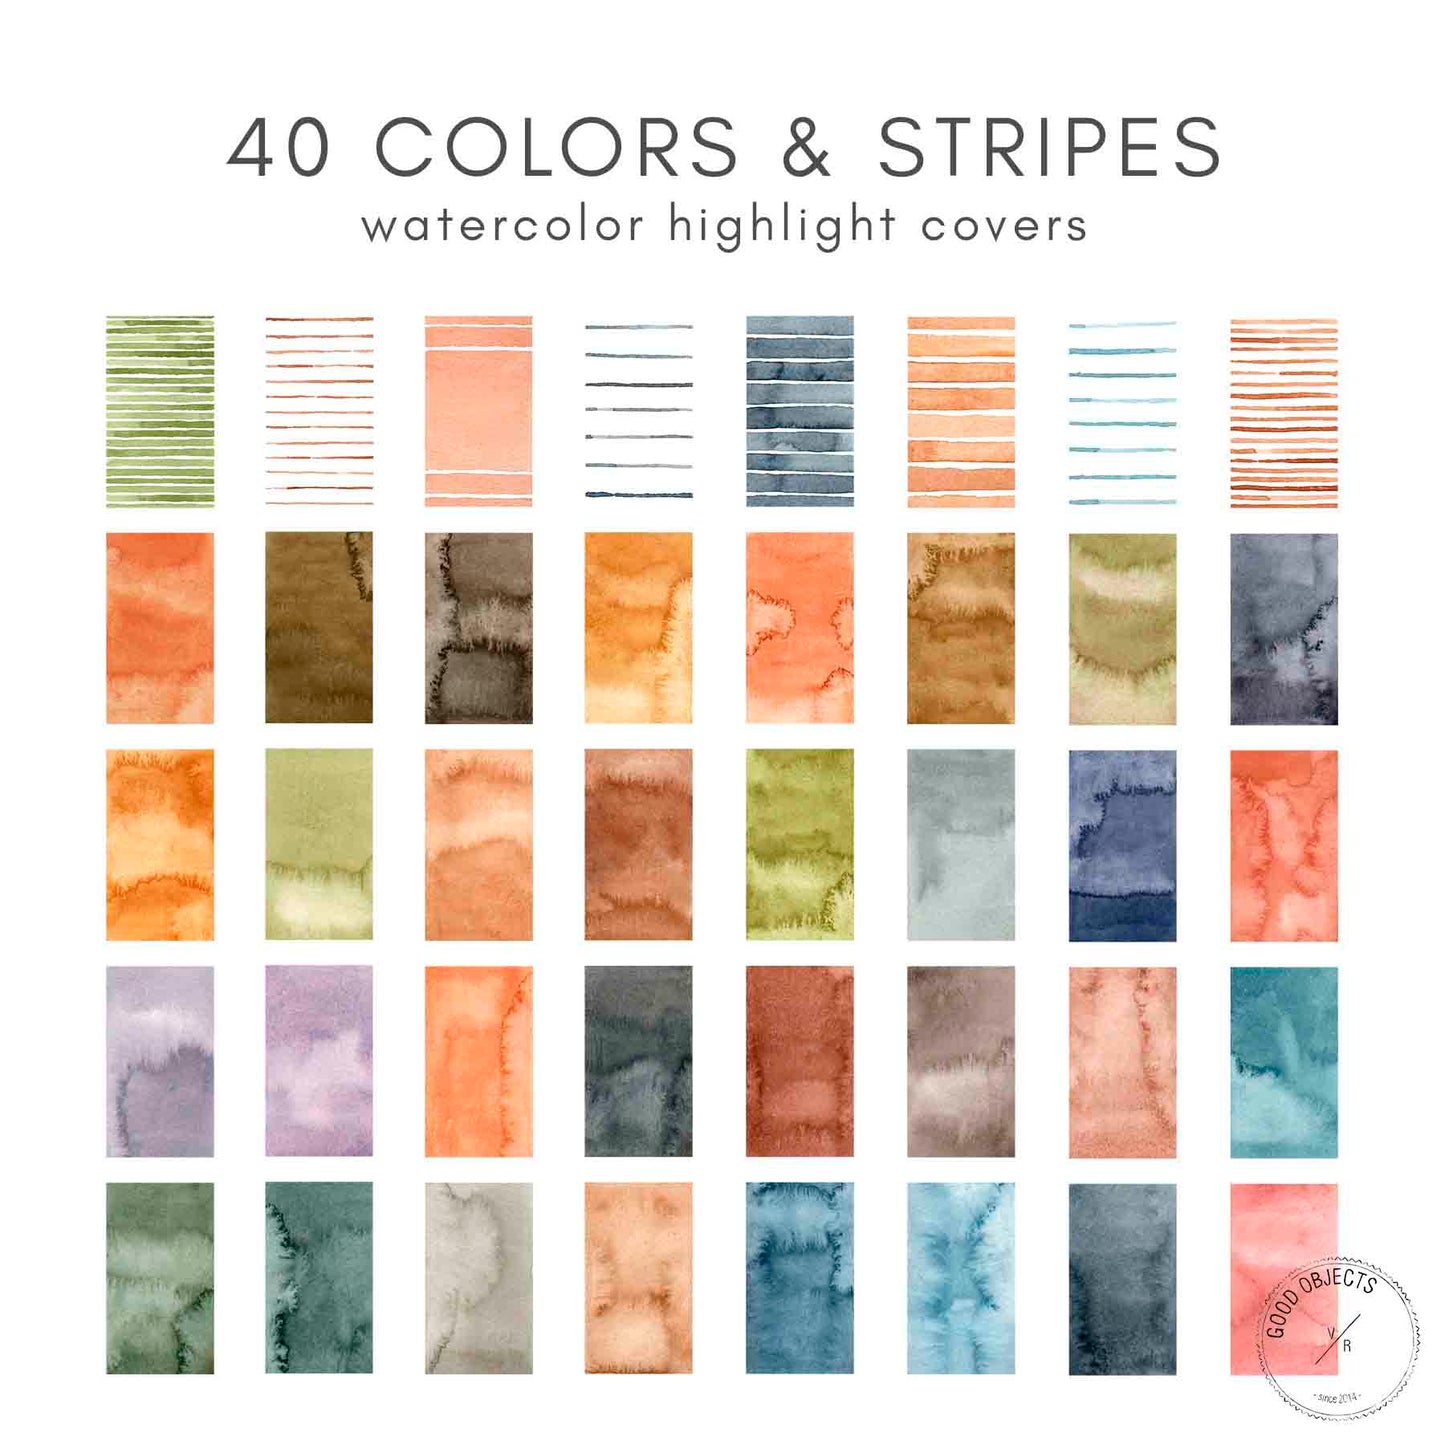 colors and stripes highlight covers